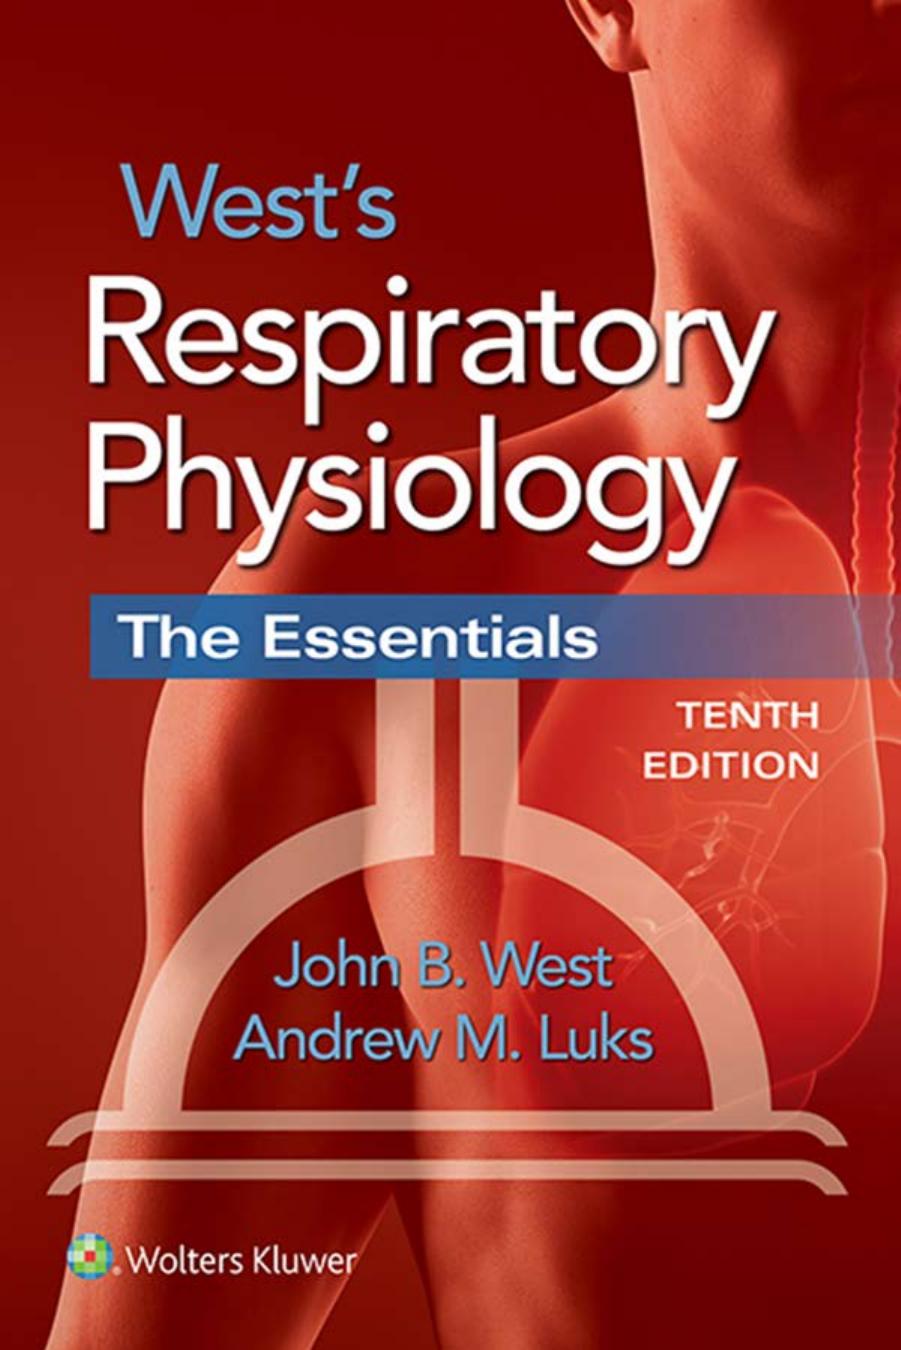 West’s Respiratory Physiology The Essentials 2016